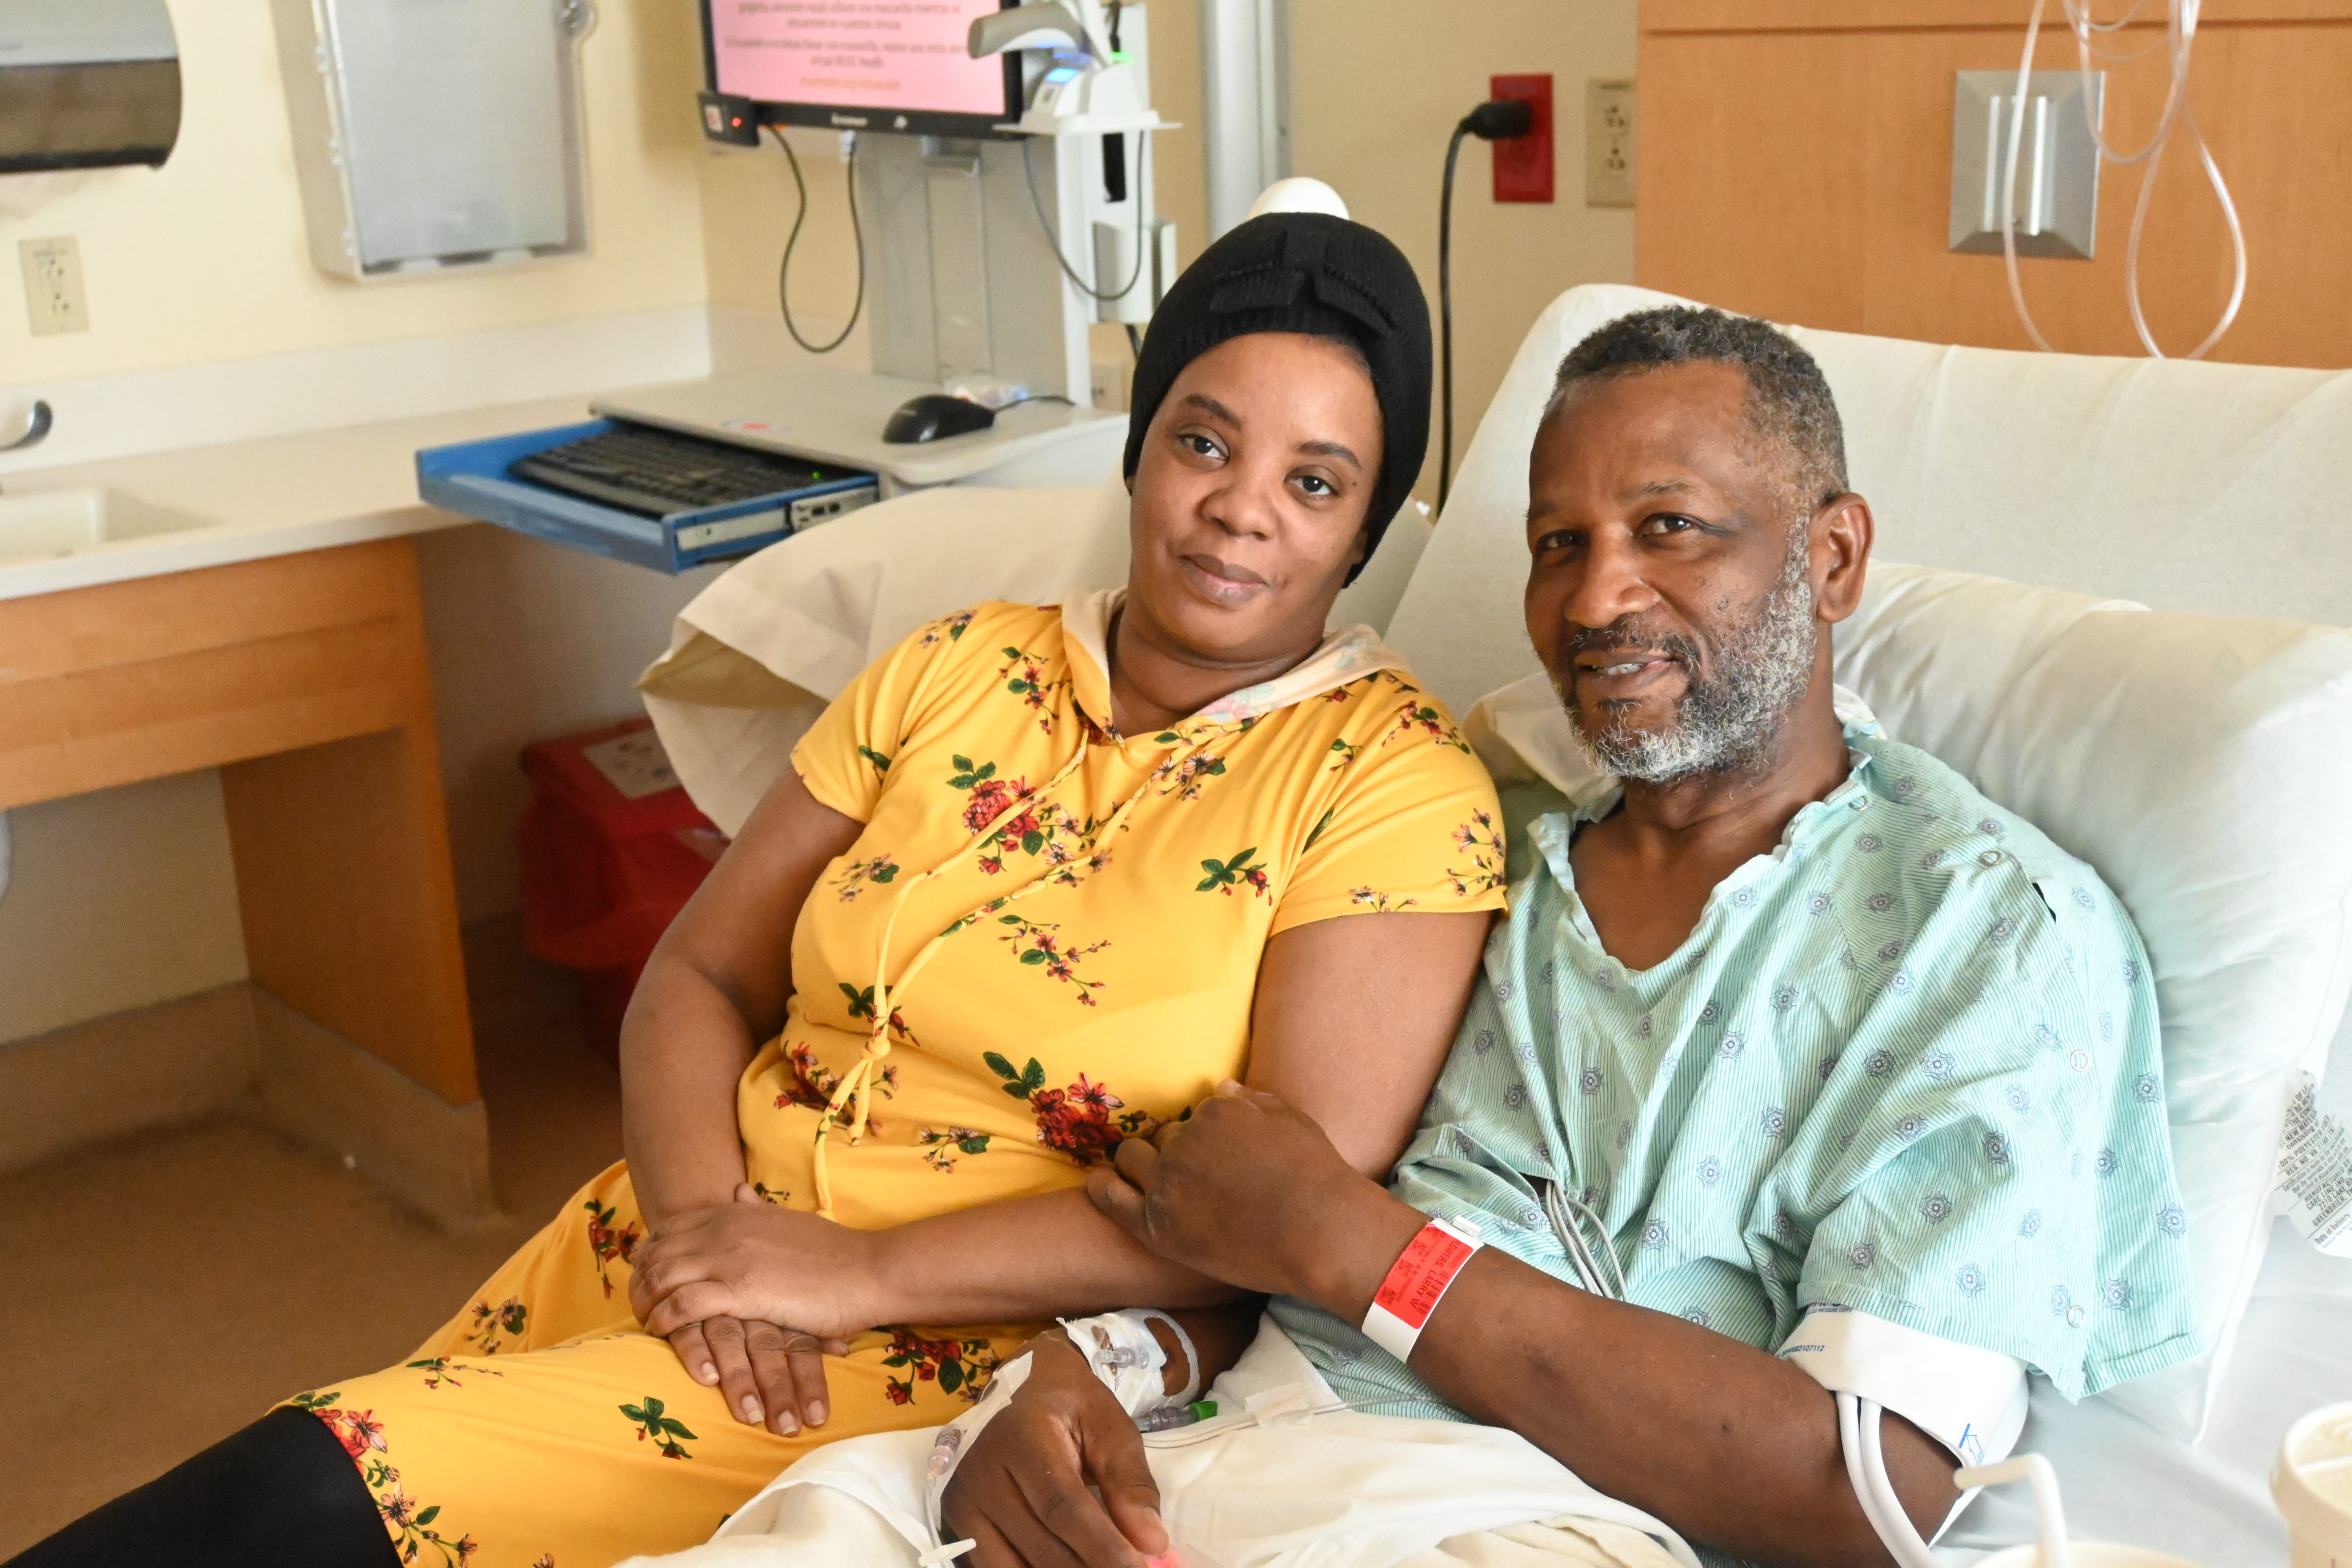 A woman and man smile in a hospital bed. The man is the patient. She is visiting him.